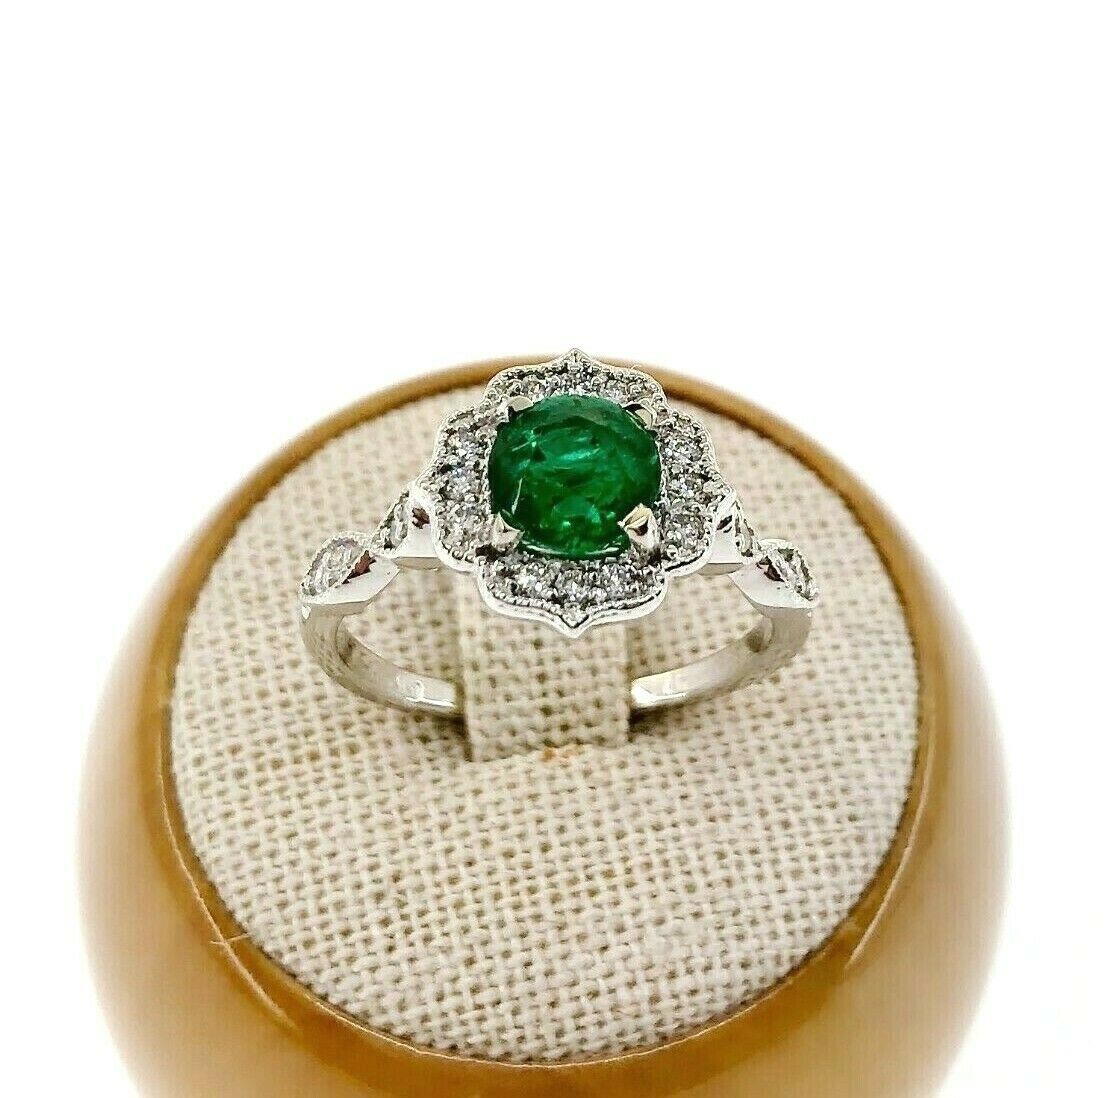 1.37 Carats t.w. Diamond and Emerald Halo with Accents Pave Ring 14K Gold